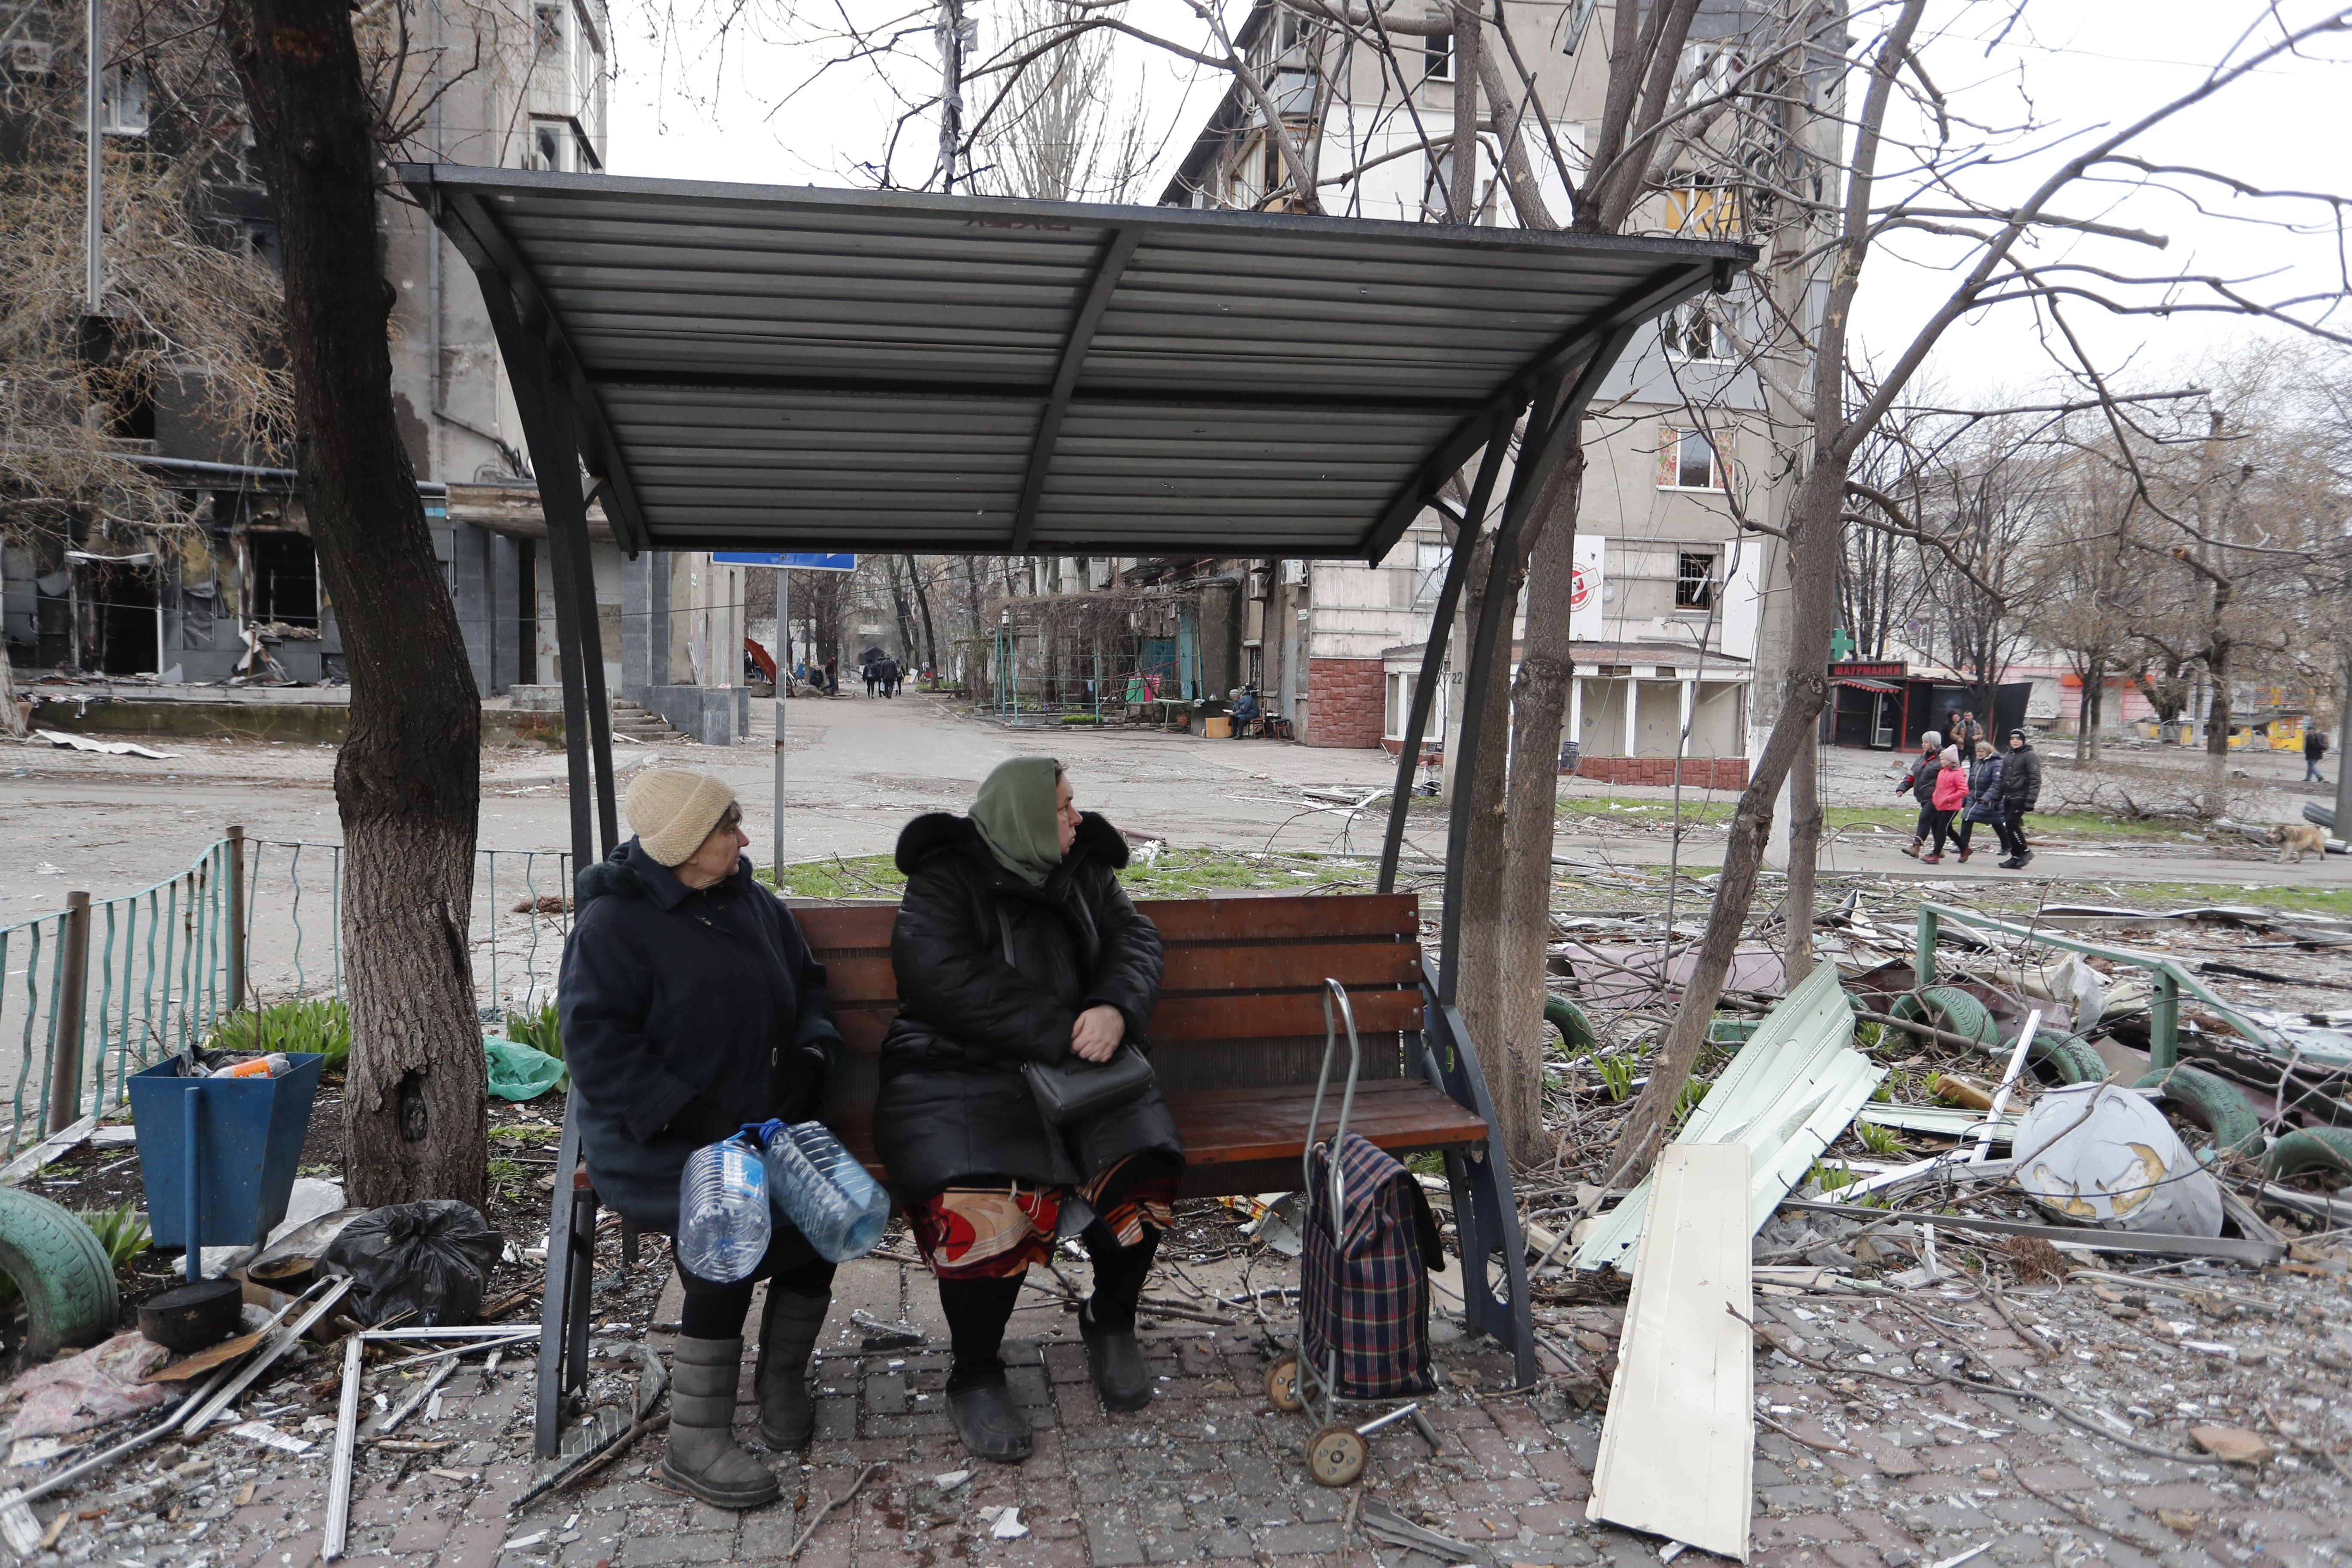  People sit outdoors in Mariupol, April 14.